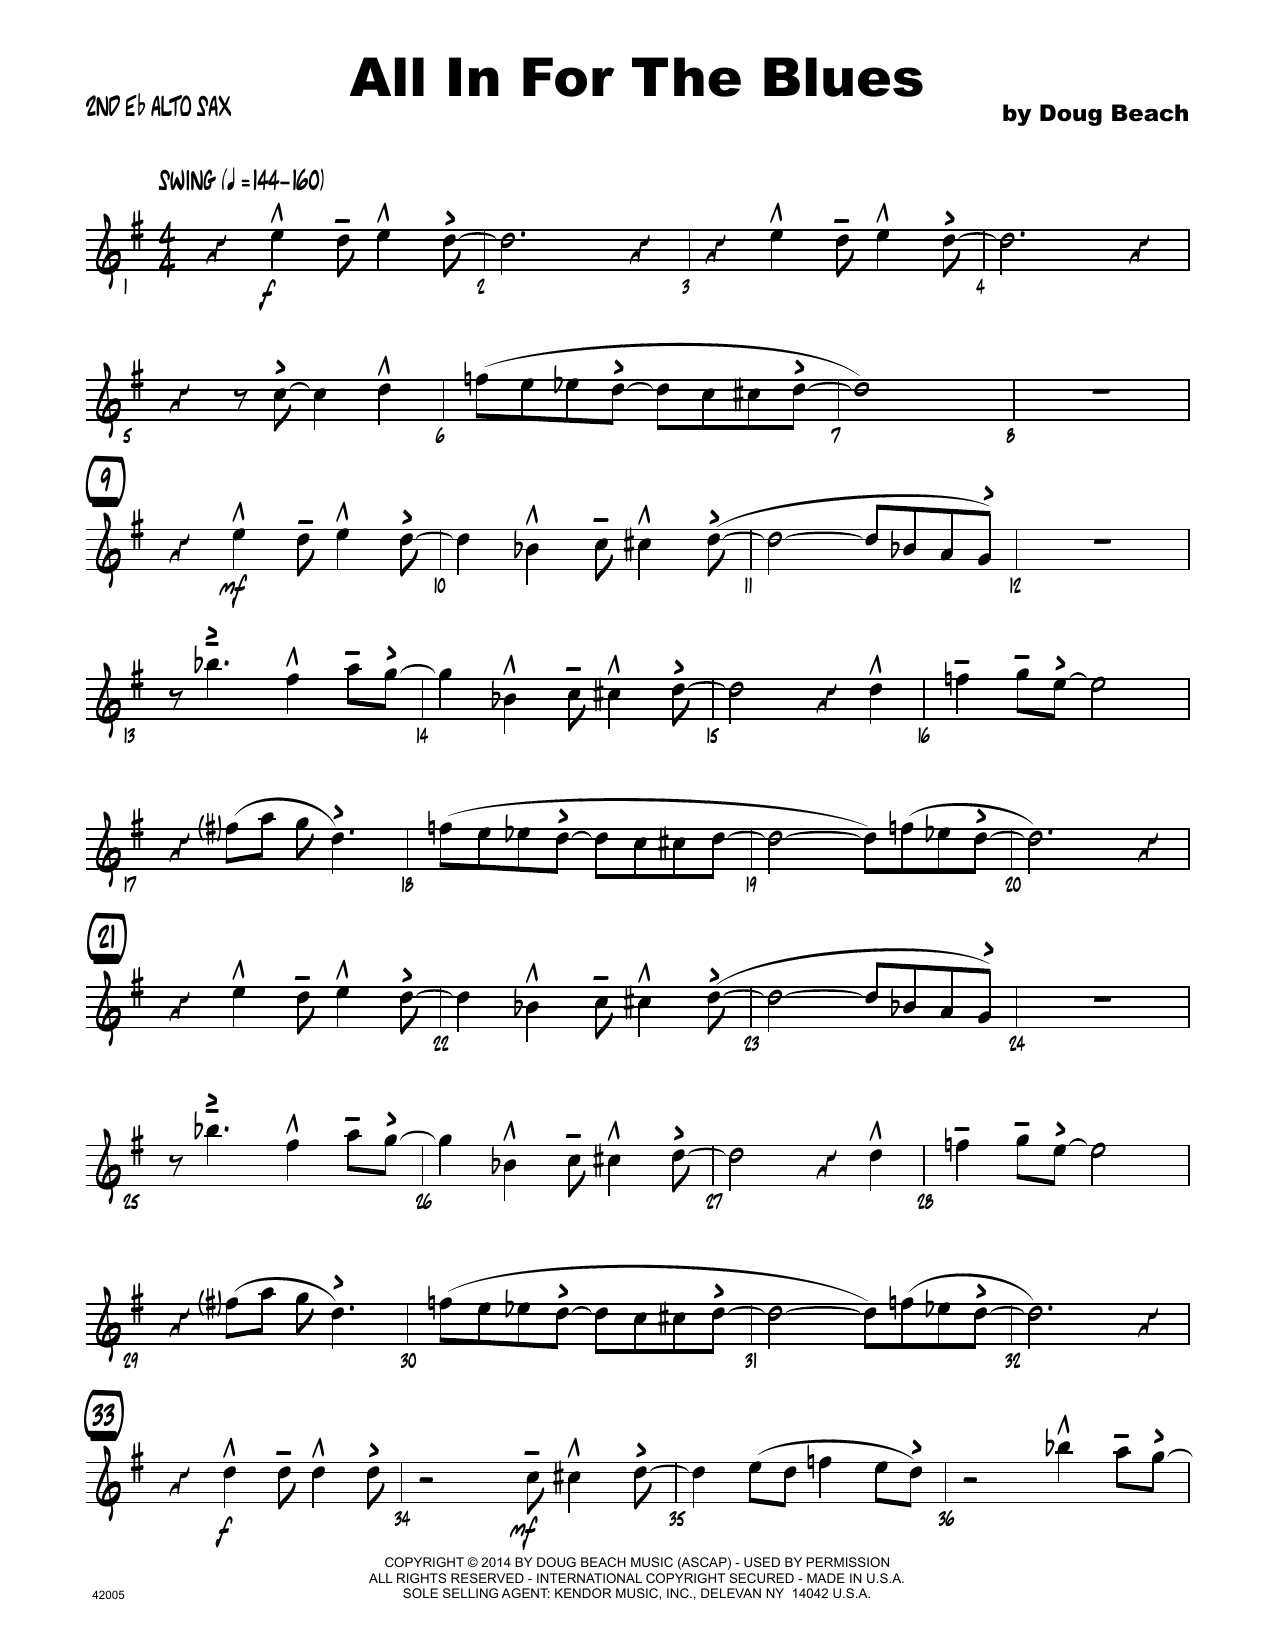 Download Doug Beach All In For The Blues - 2nd Eb Alto Saxo Sheet Music